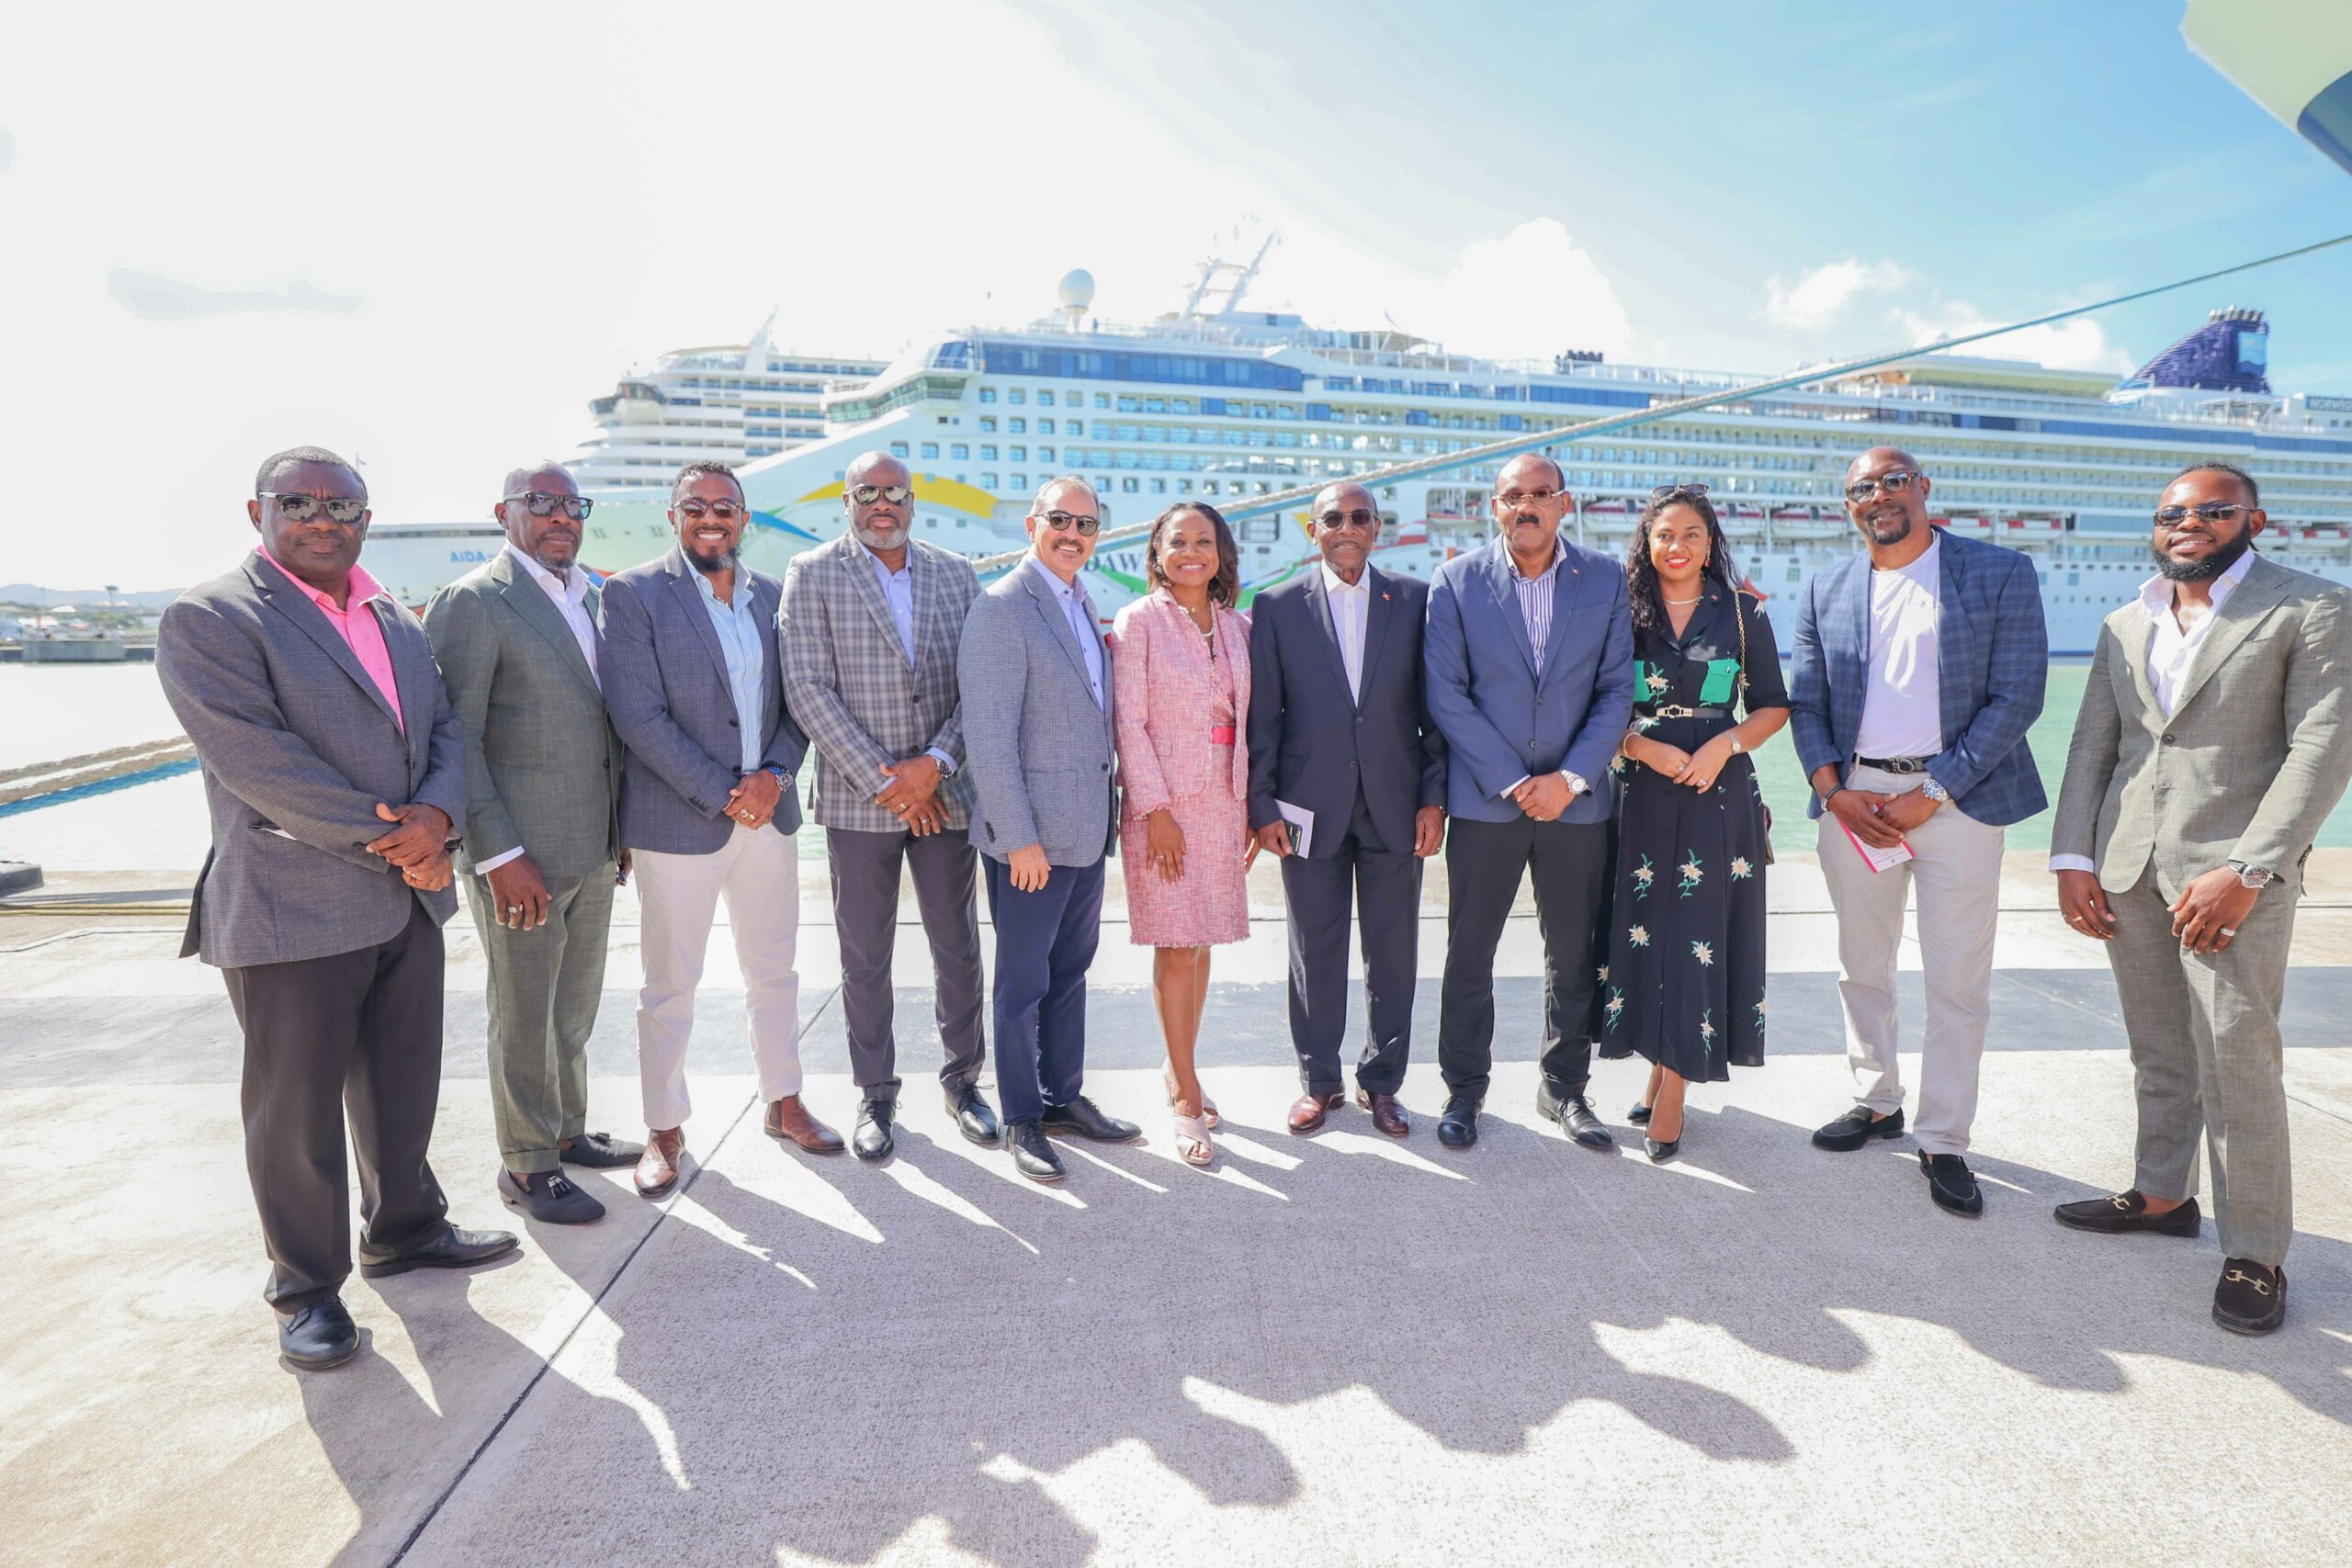 Five ships in one day to celebrate the launch of Antigua & Barbuda's cruise season